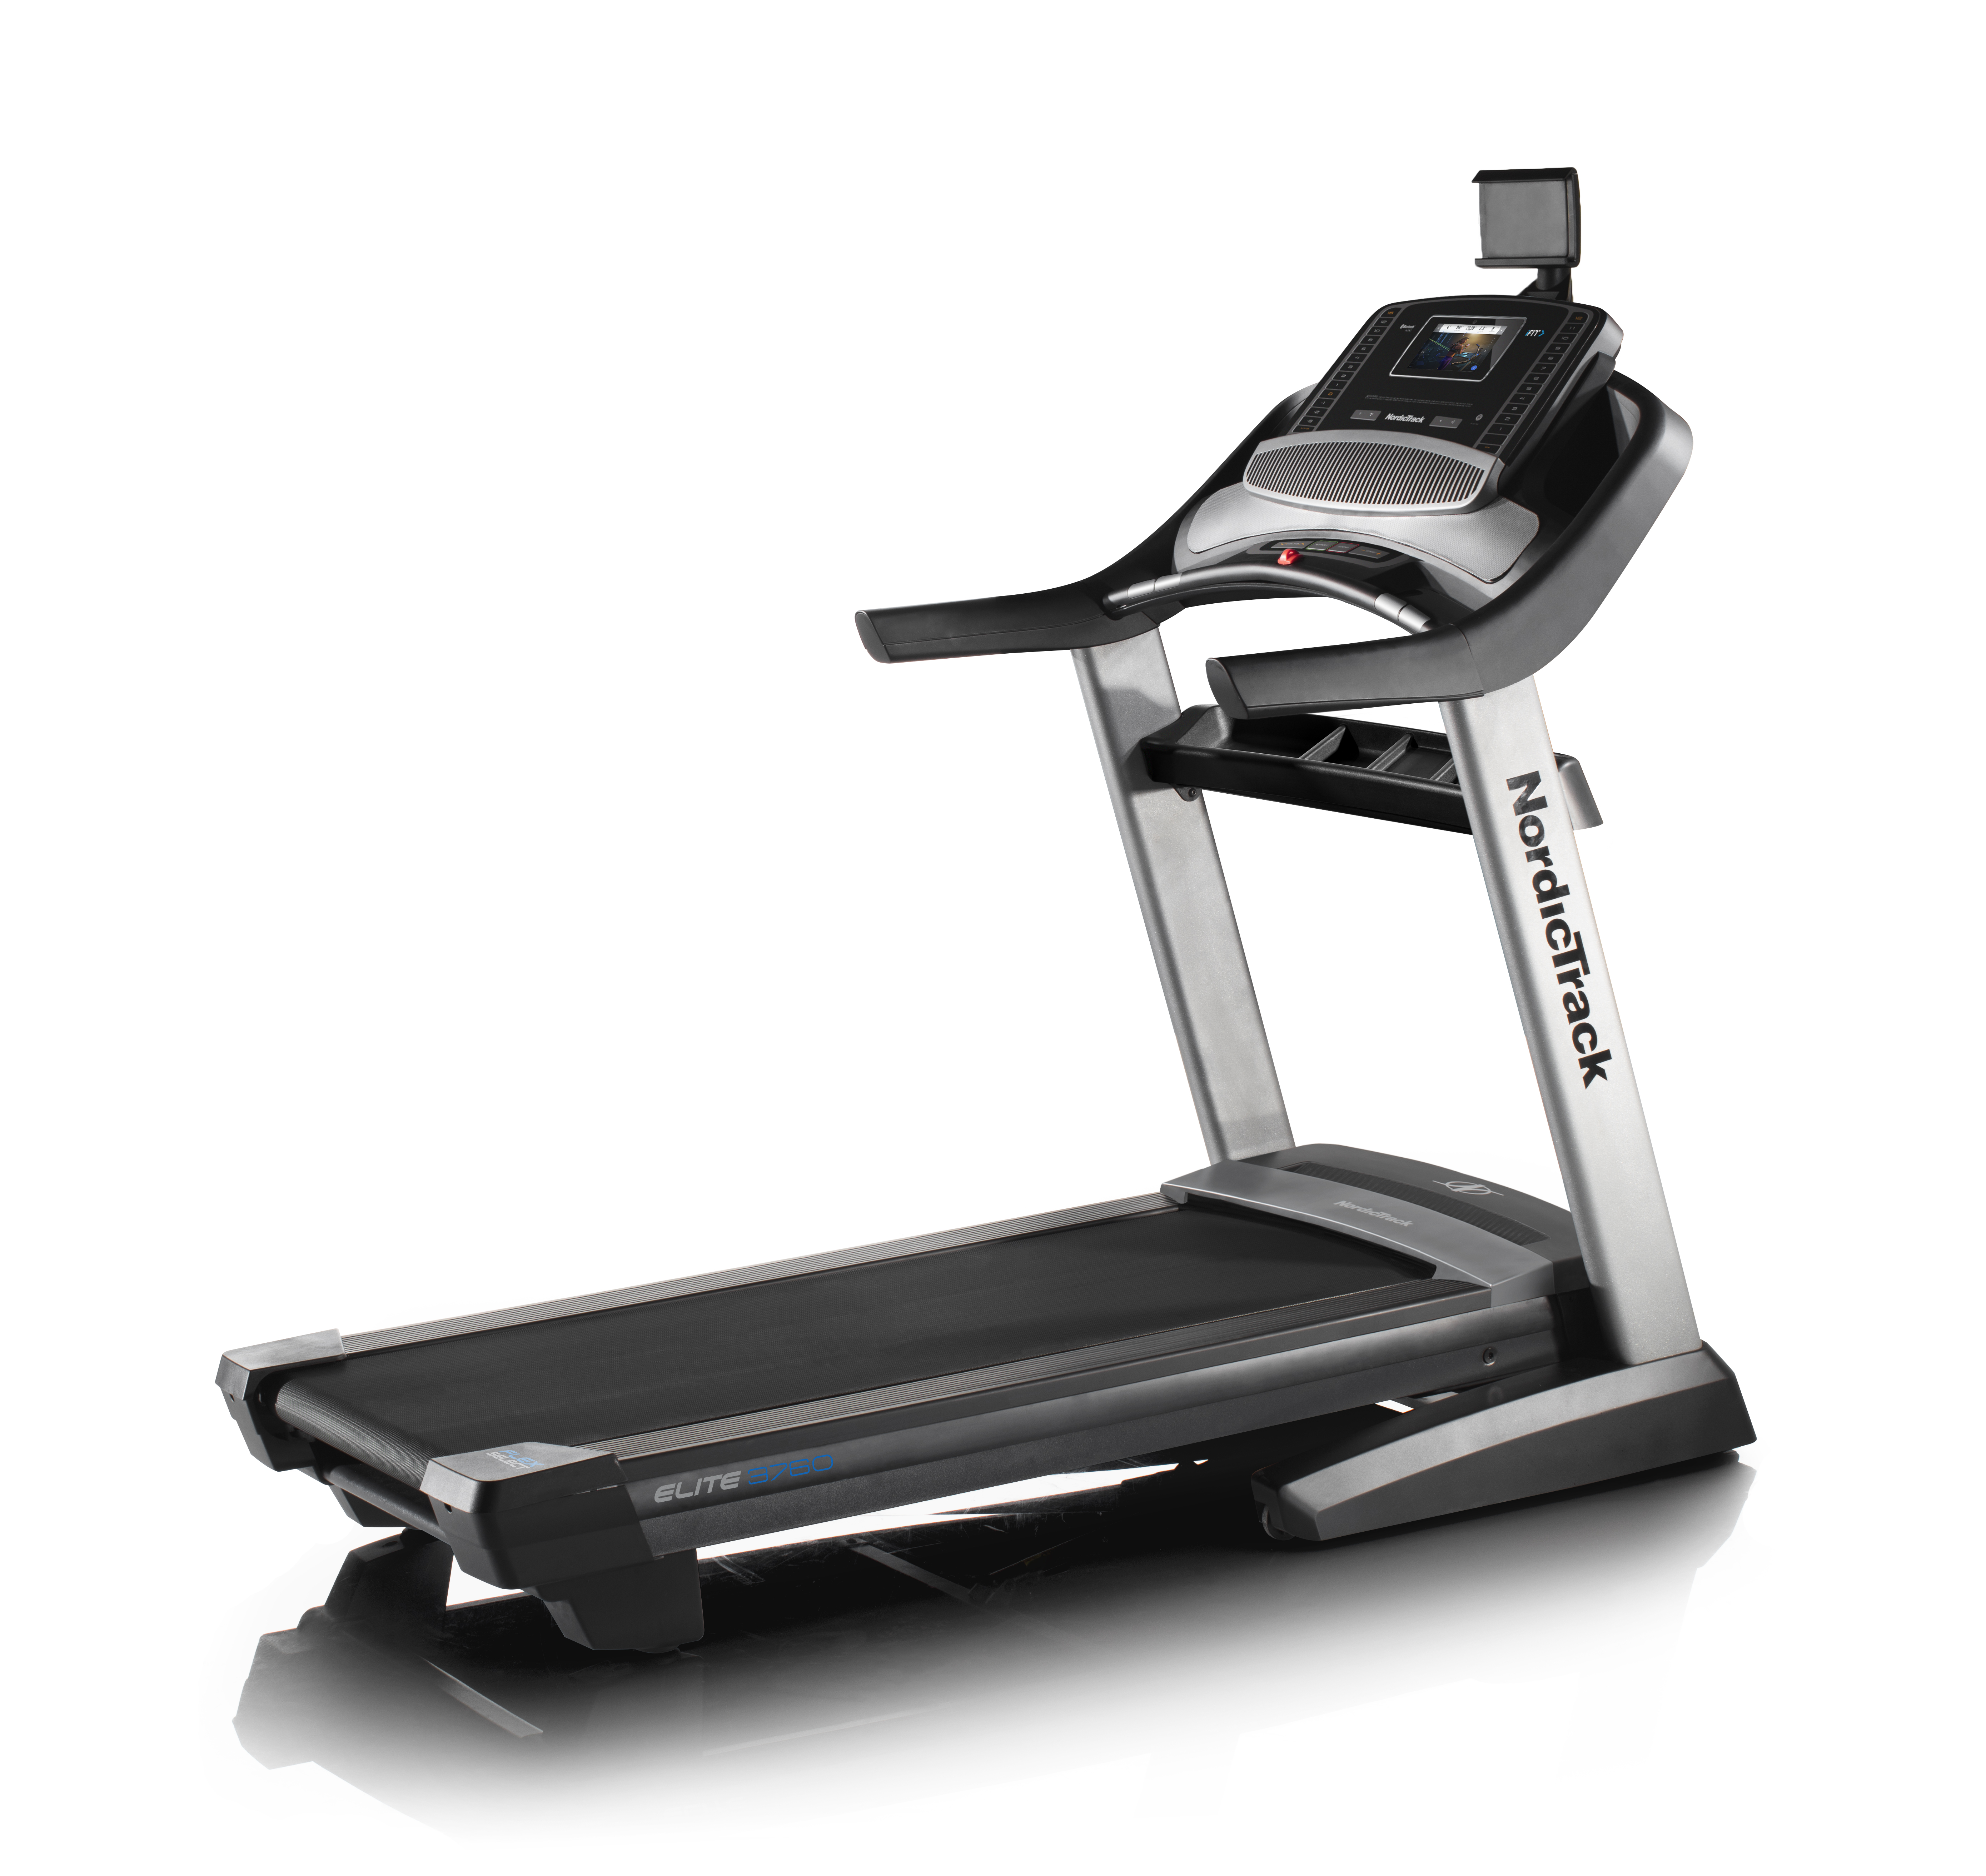 NordicTrack Elite 3760 Treadmill with iFit Coach 1 YR Membership